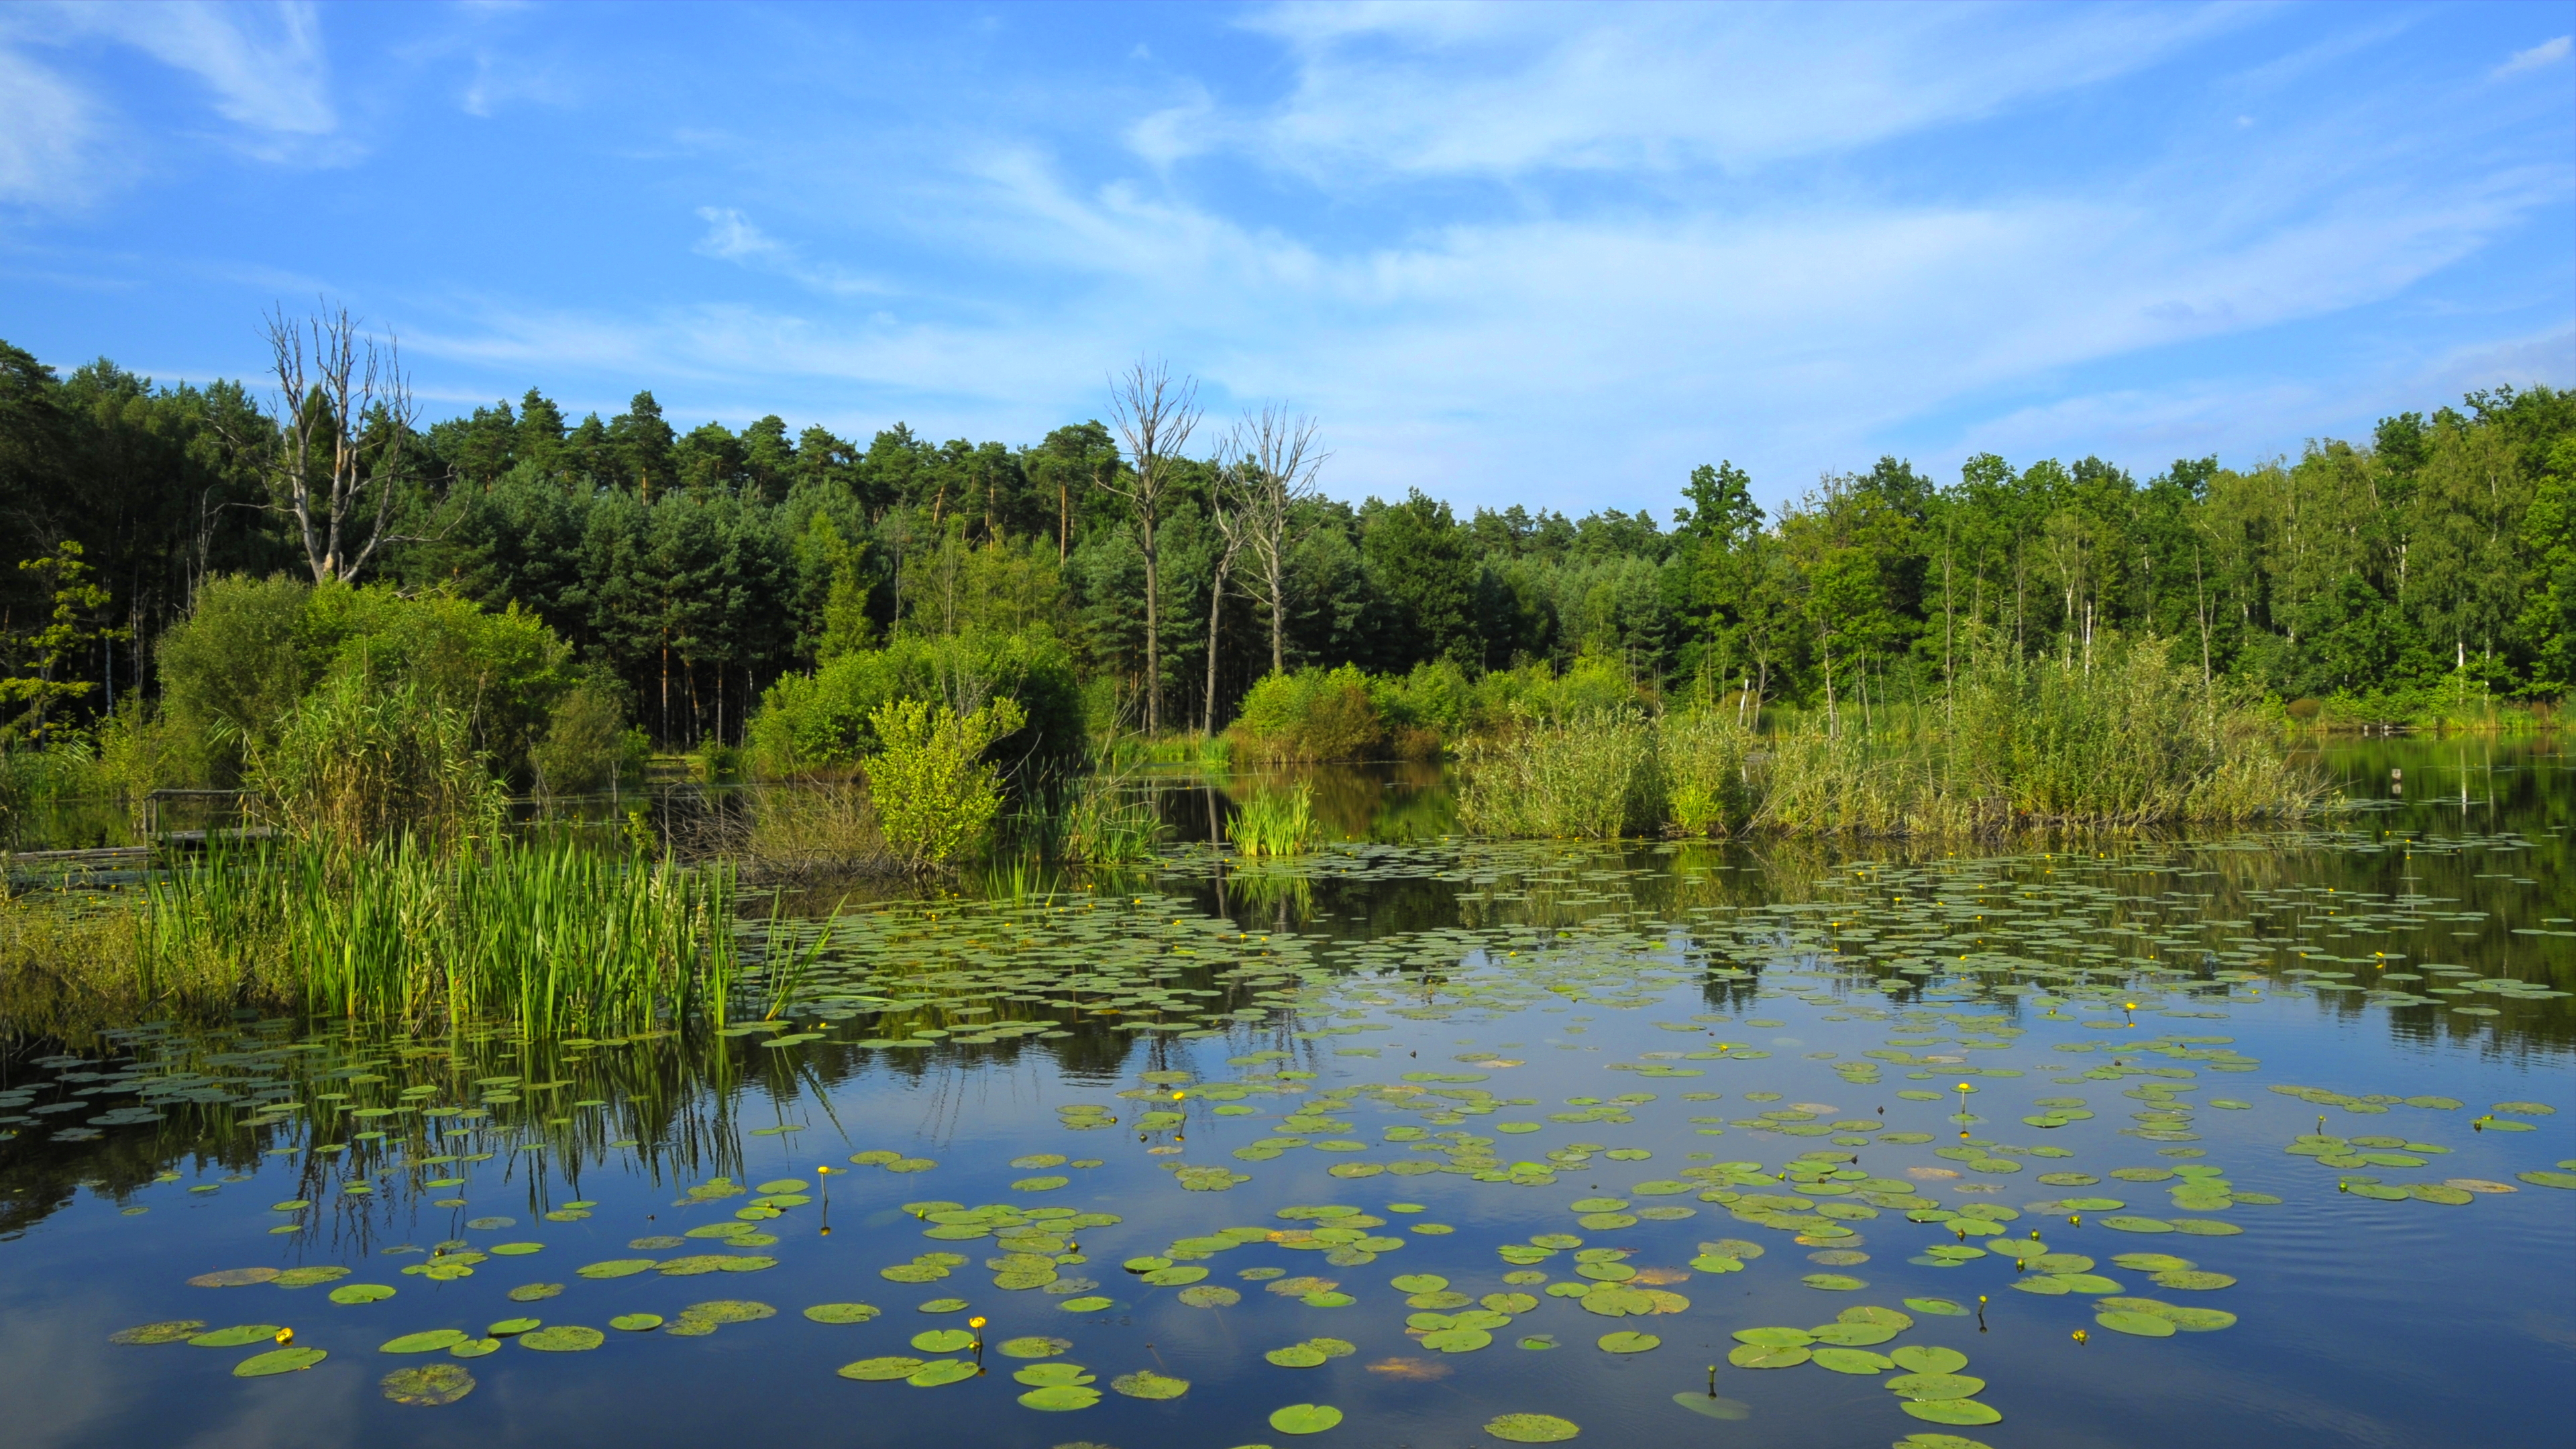 General 3840x2160 arboretum landscape forest Poland lake pine trees nature duckweed grass water reflection sky clouds trees water lilies